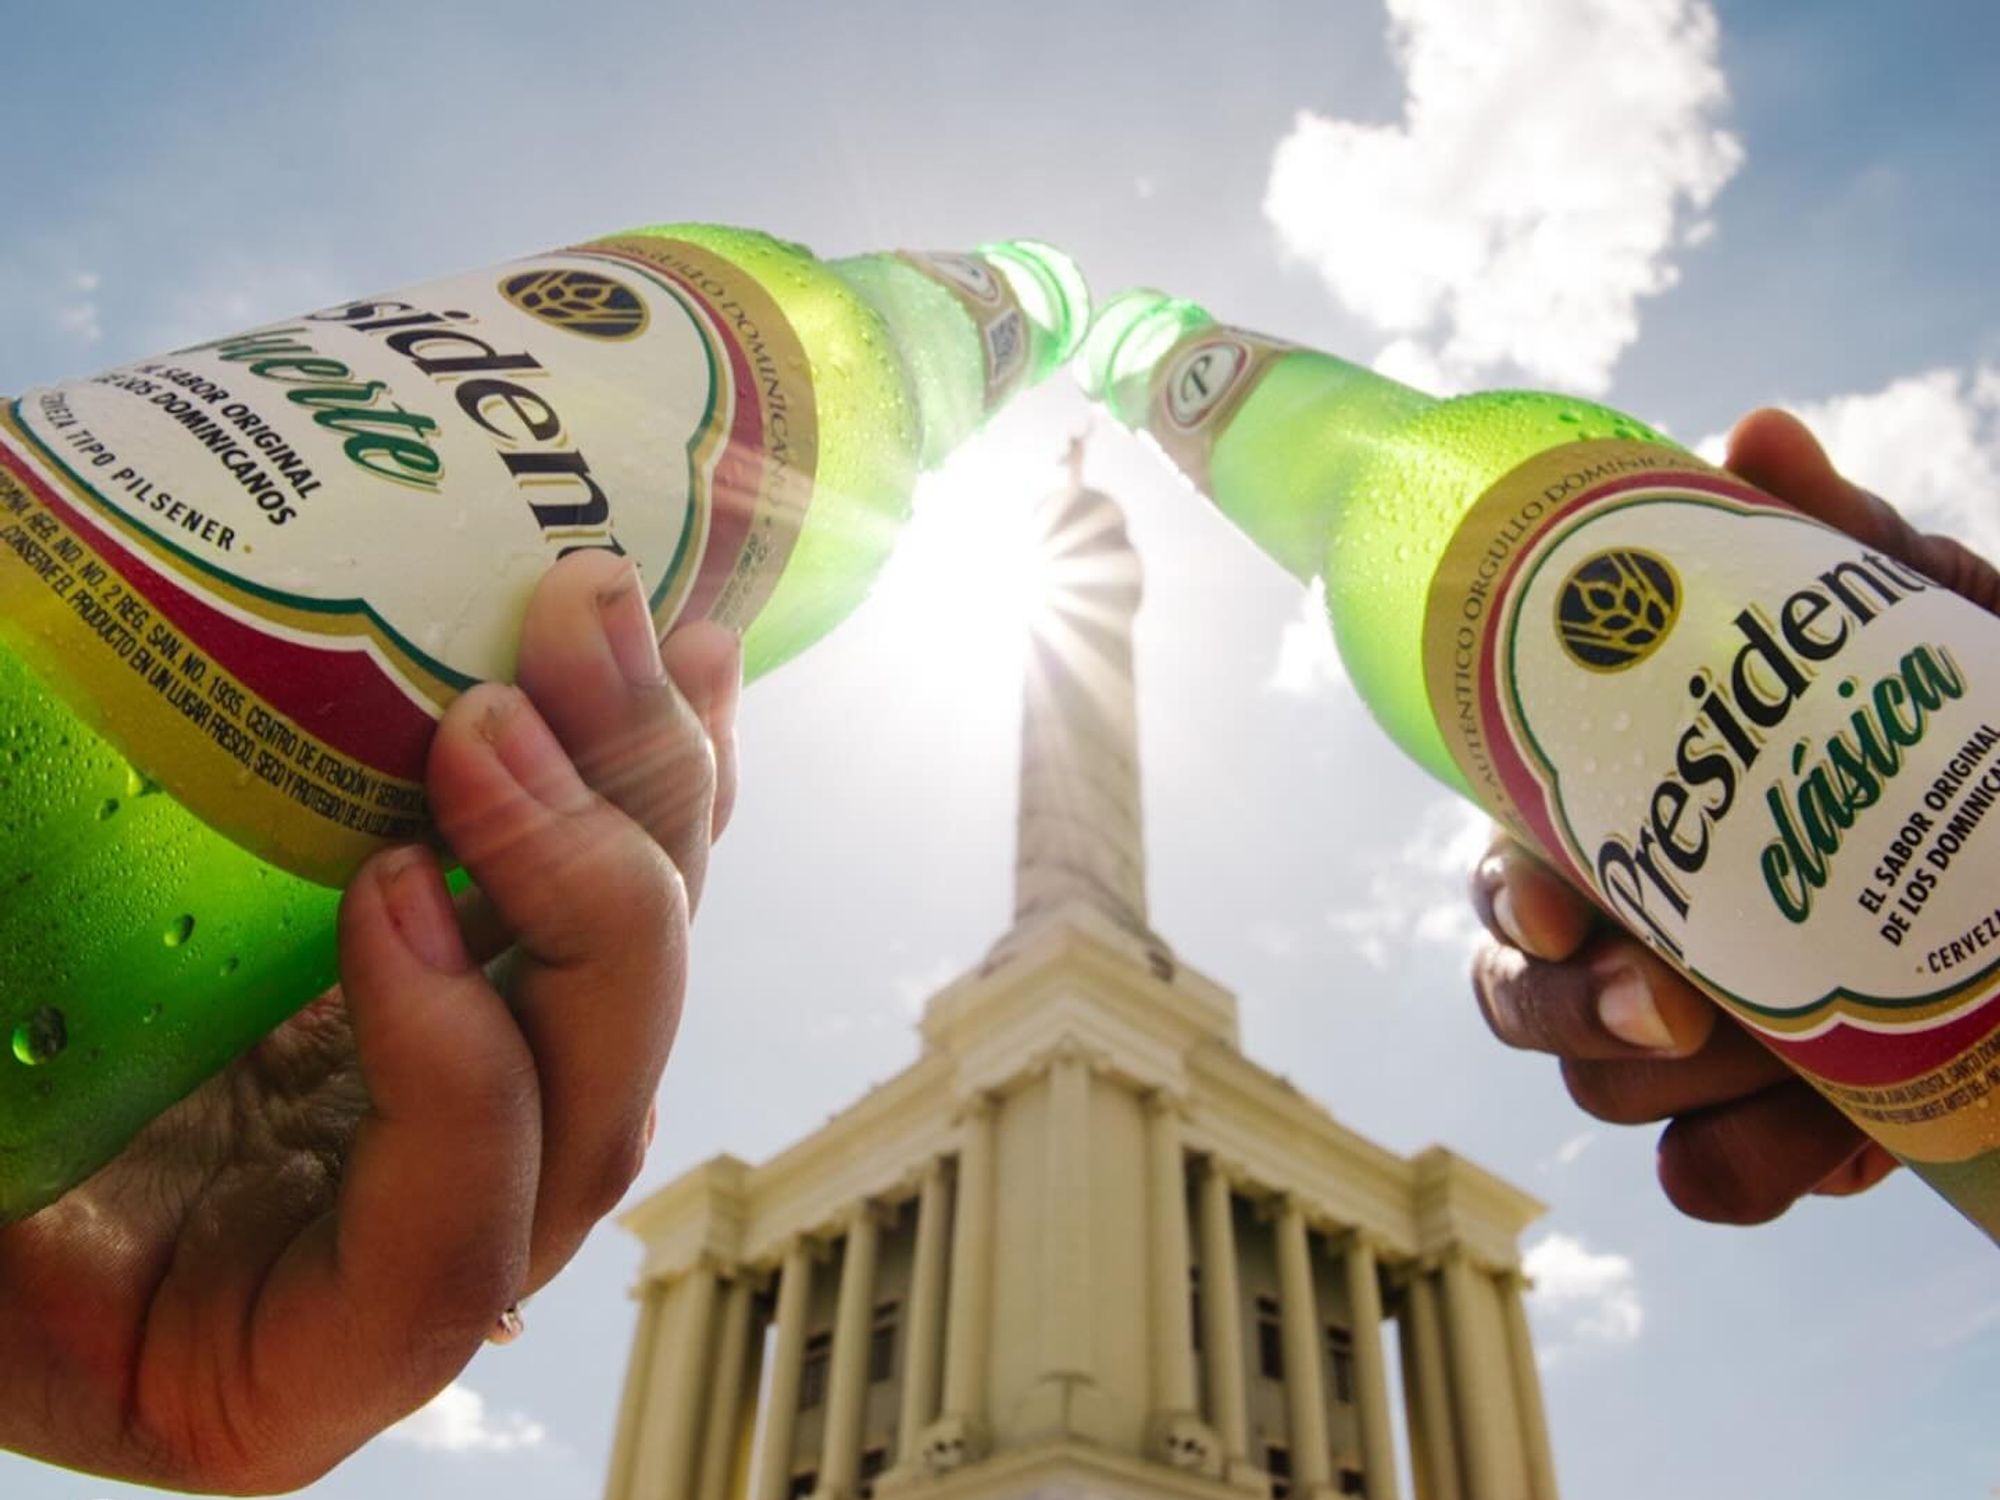 Two individuals raise bottles of 'Presidente,' Dominican Republic's beer in a toast.